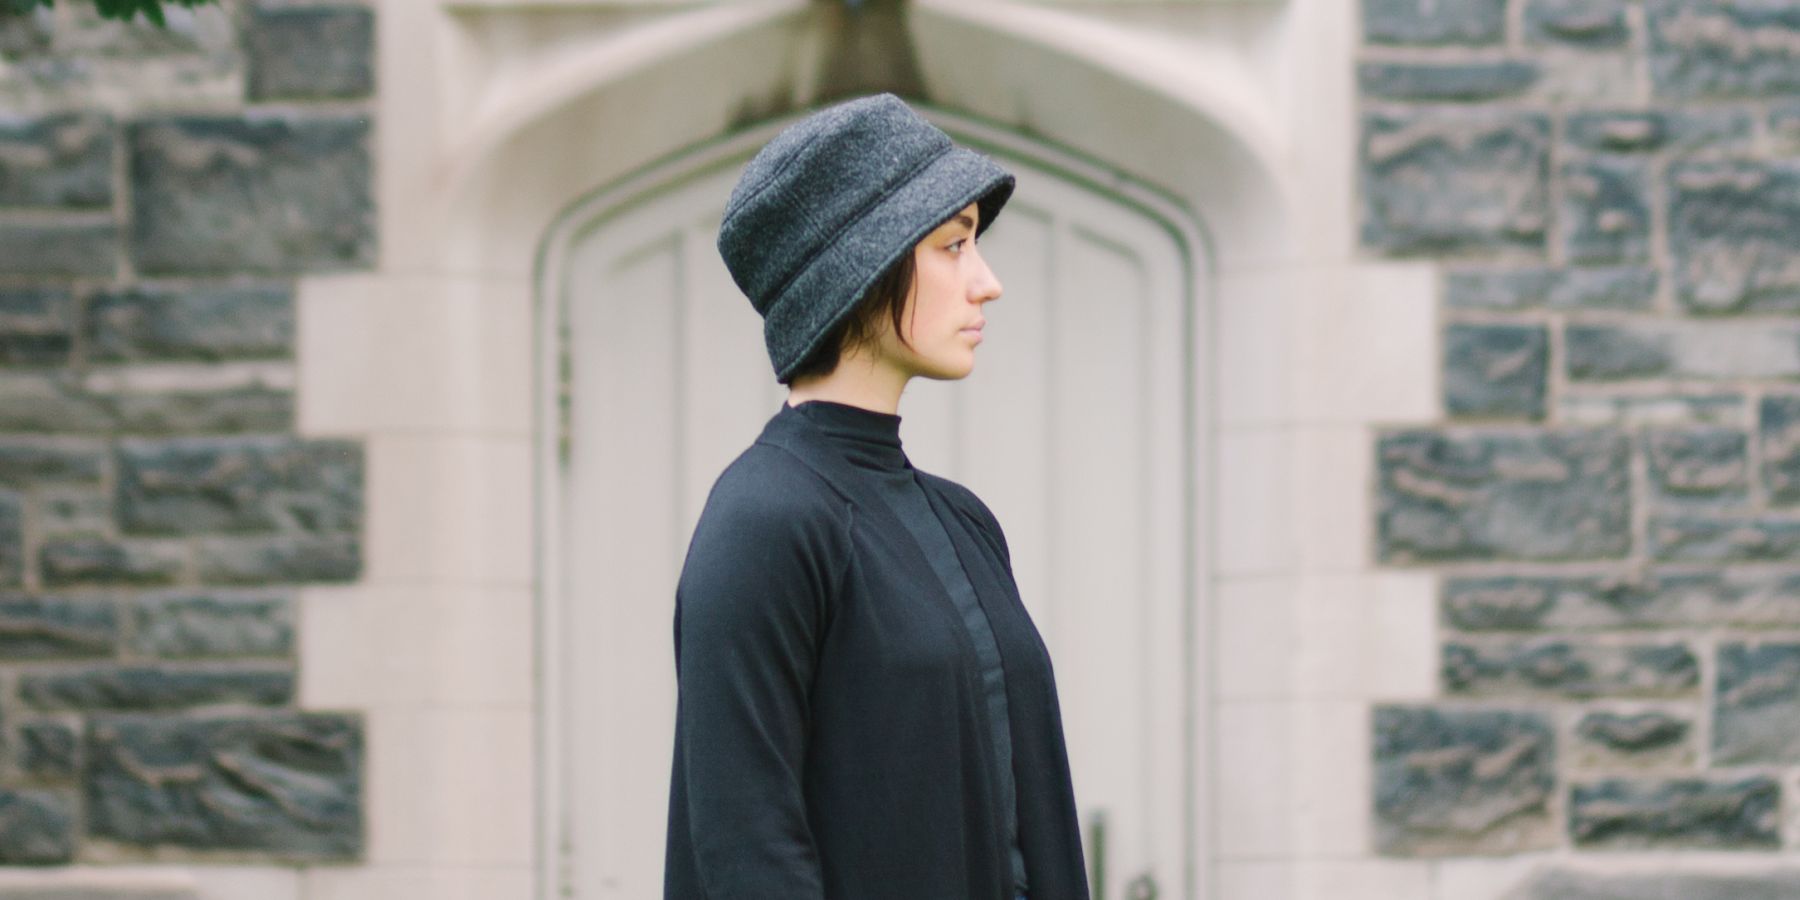 Luxuriously warm boiled wool hats to take on winter with style.  Wool is made in The Netherlands and hats are carefully made in Canada by Puffin Gear.  Choose from ball caps, pillbox hats or bucket hats. Carefully made in Canada by Puffin Gear.